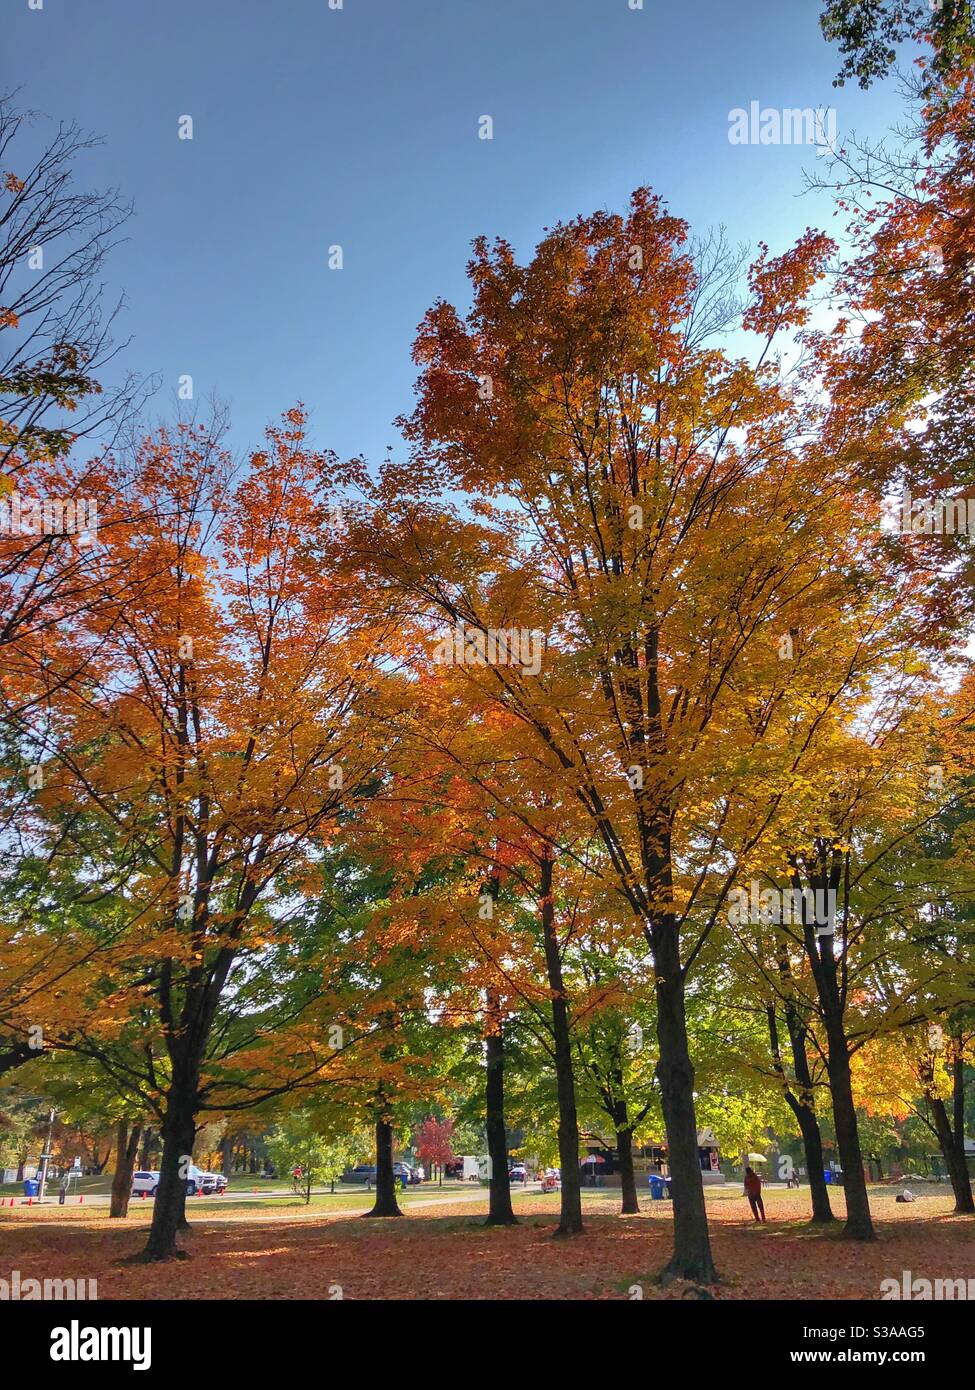 A colourful autumn day in High Park, Toronto, Canada. Stock Photo